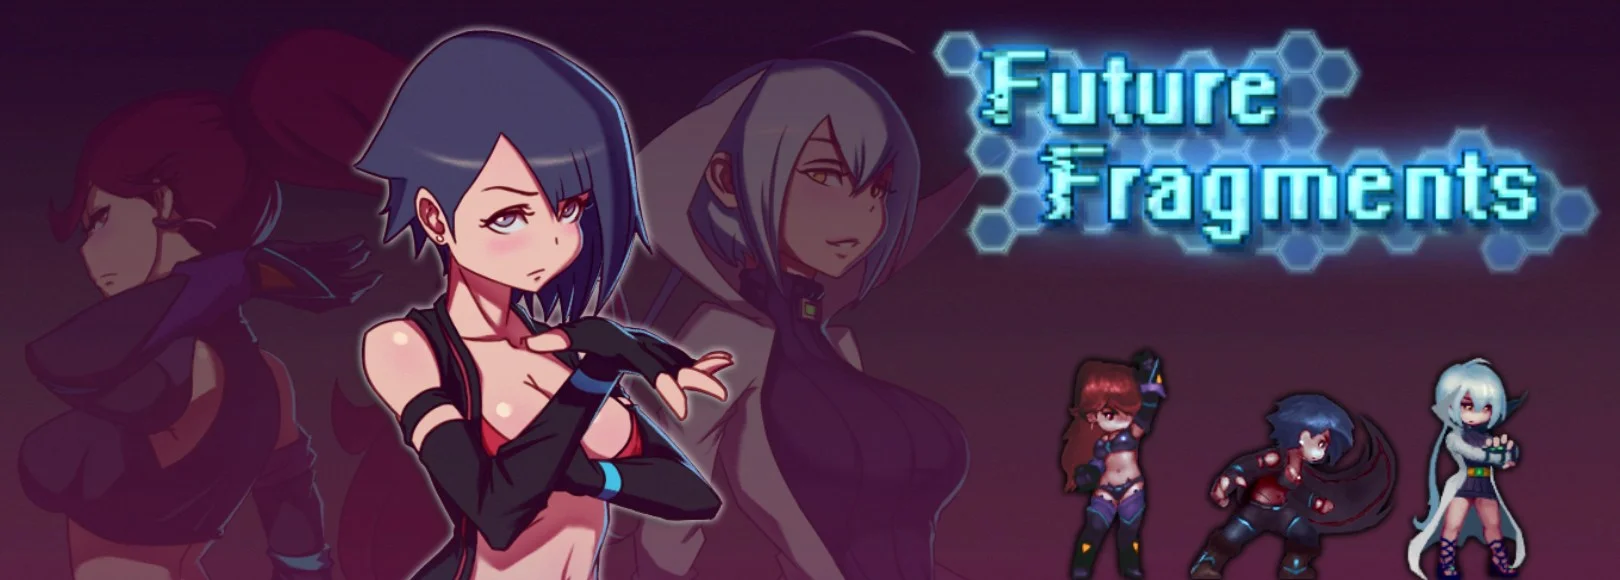 Future Fragments [HentaiWriter] Adult xxx Game Download